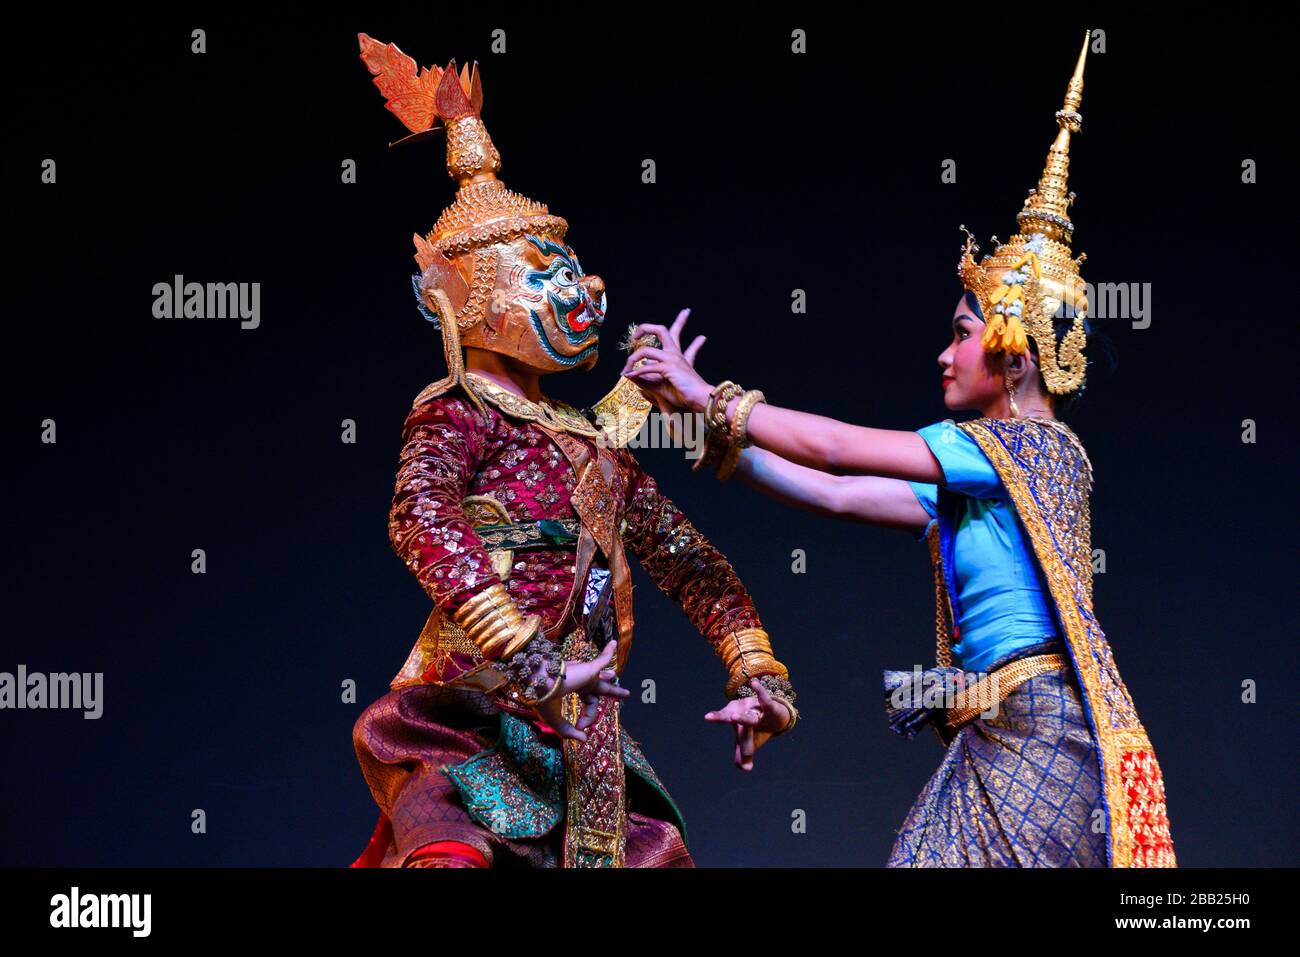 Cambodian Living Arts performance in Phnom Penh,Cambodia,South East Asia. Stock Photo